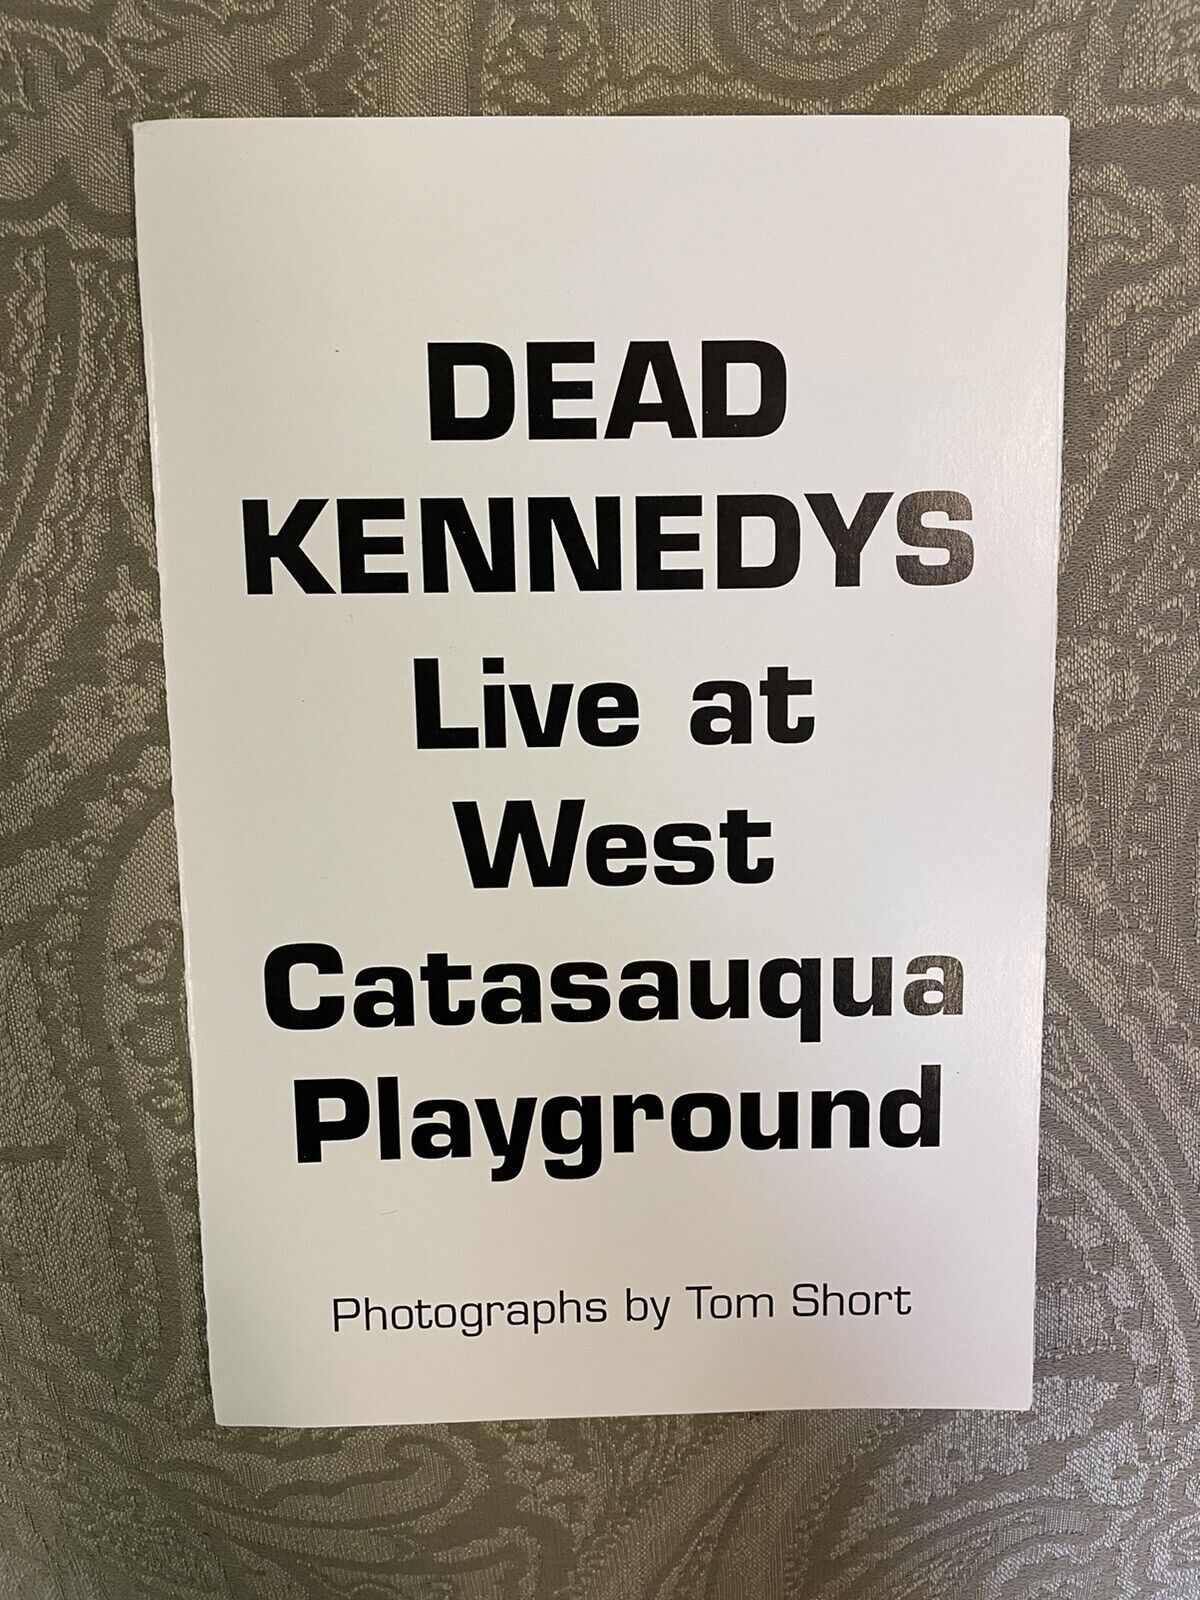 Dead Kennedys Live At West Catasauqua Playground Photographs Zine By Tom Short